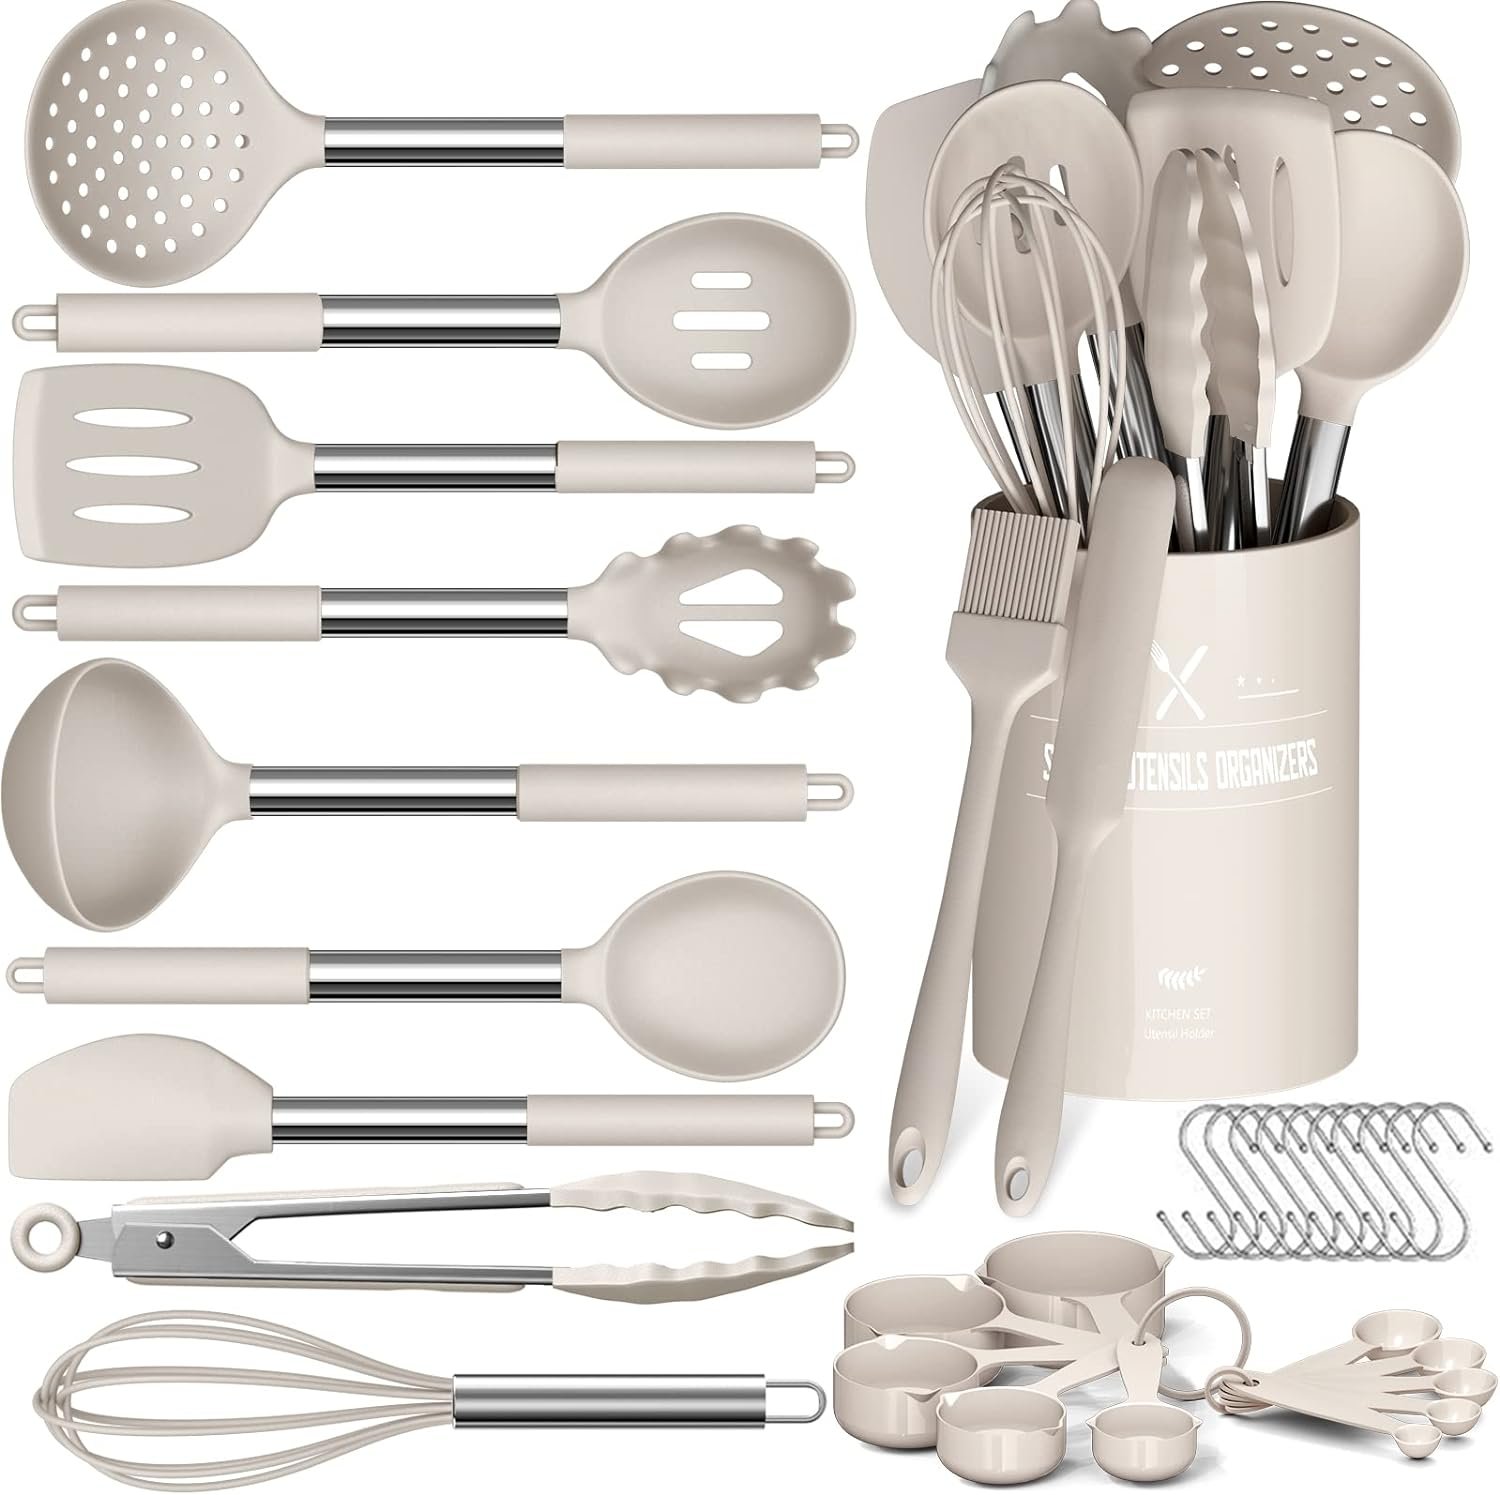 Kitchen Cooking Utensils Set- 33PC Silicone Kitchen Utensils Set - Non-Stick Kitchen Utensils with Spatula,Kitchen Tools Gadgets with Stainless Steel Handle (Khaki)